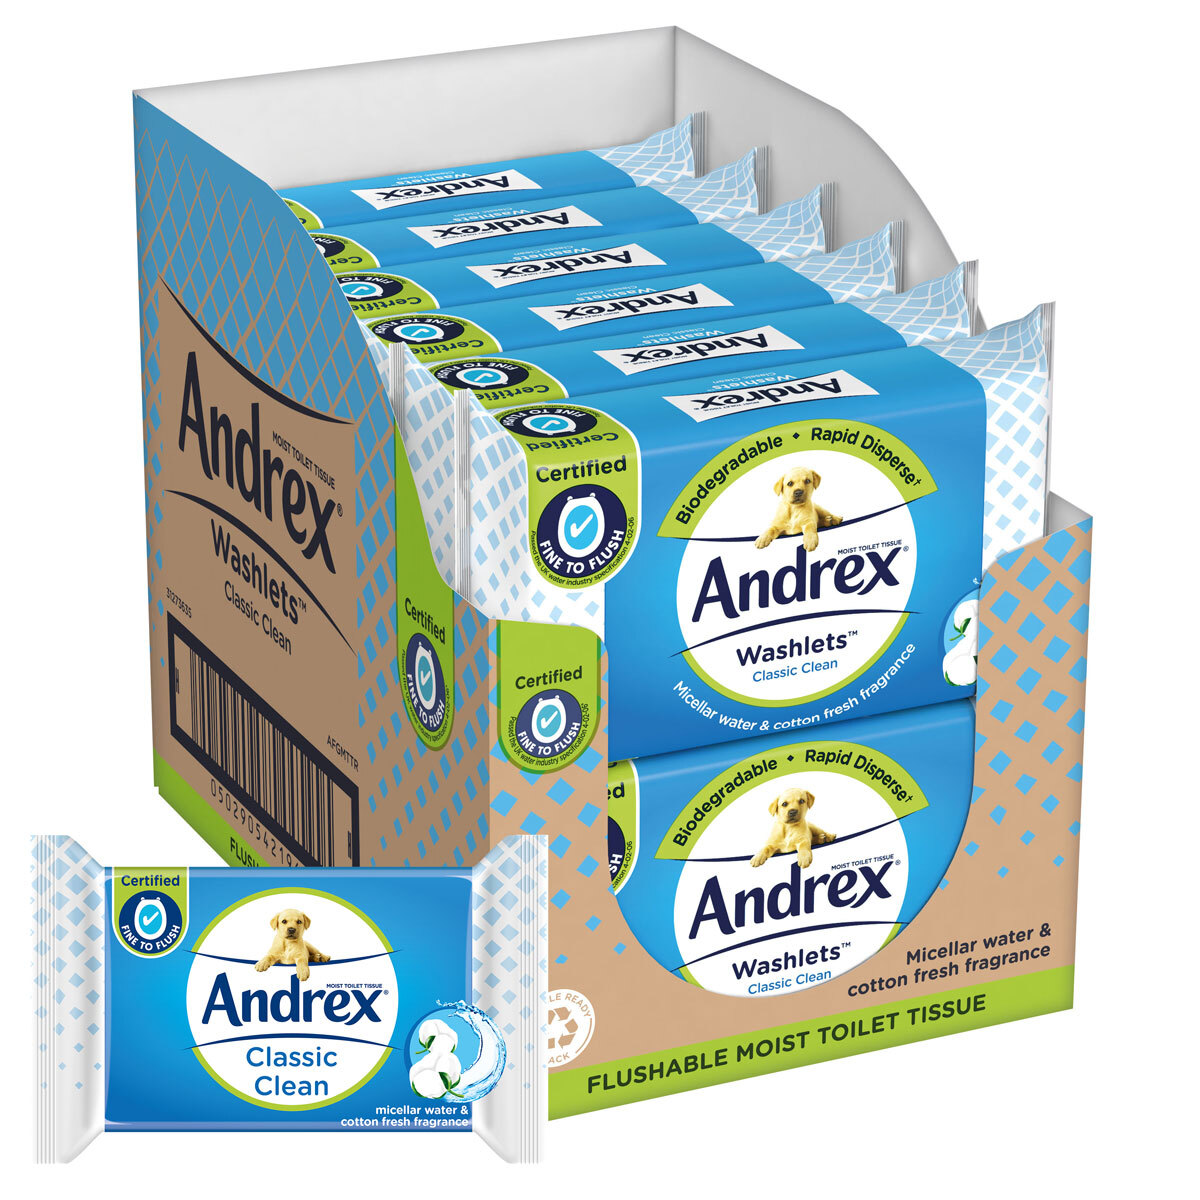 Andrex Classic Clean Washlets Moist Toilet Tissue, 12 x 40 Wipes